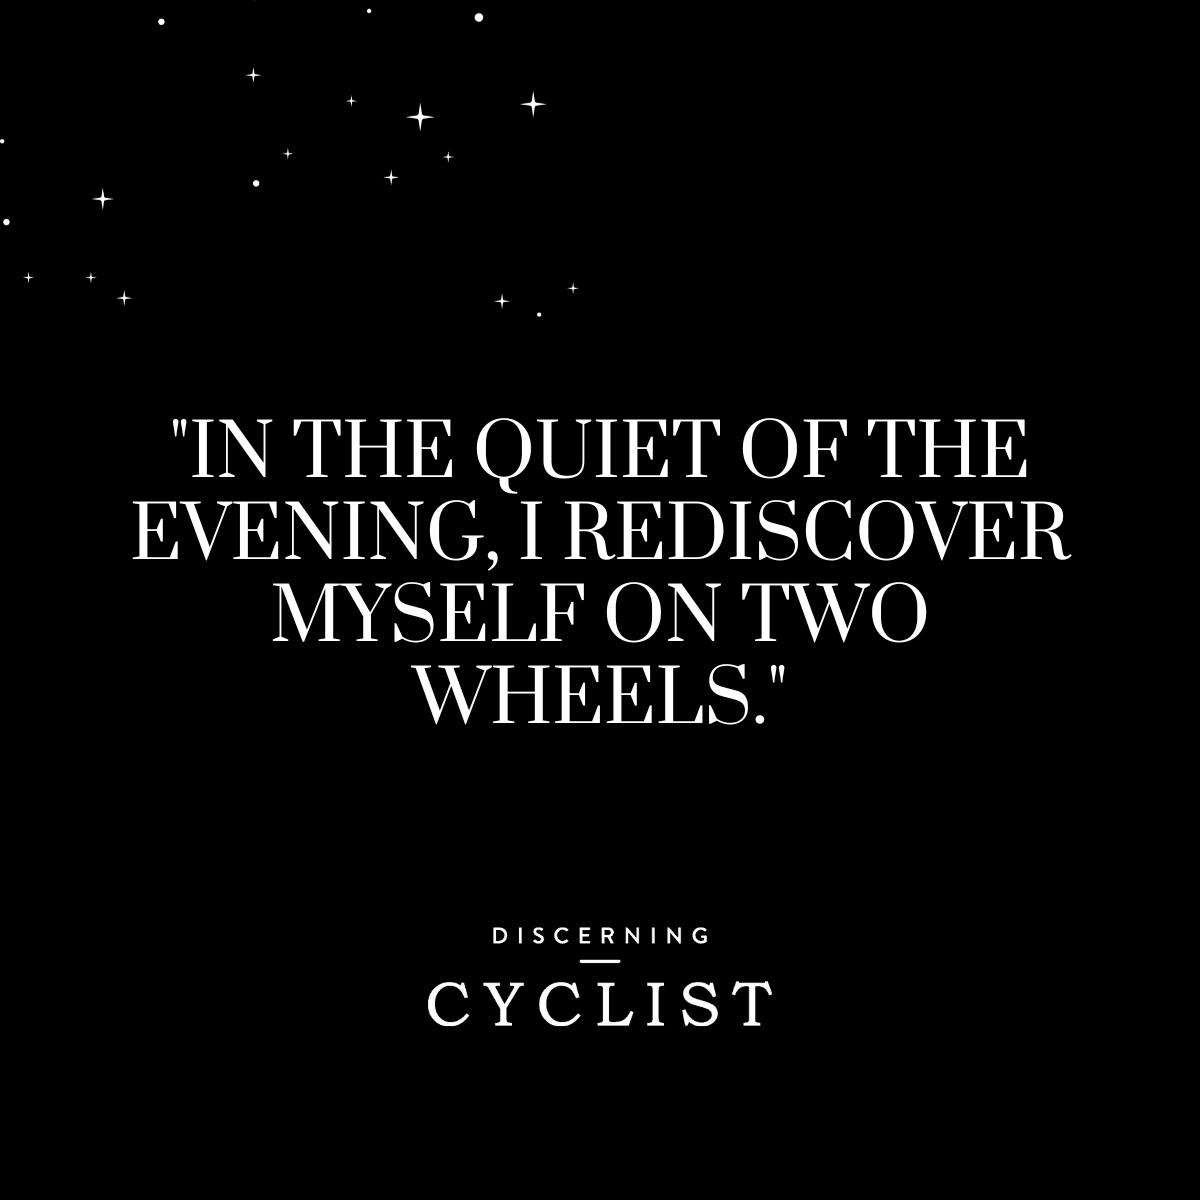 "In the quiet of the evening, I rediscover myself on two wheels."